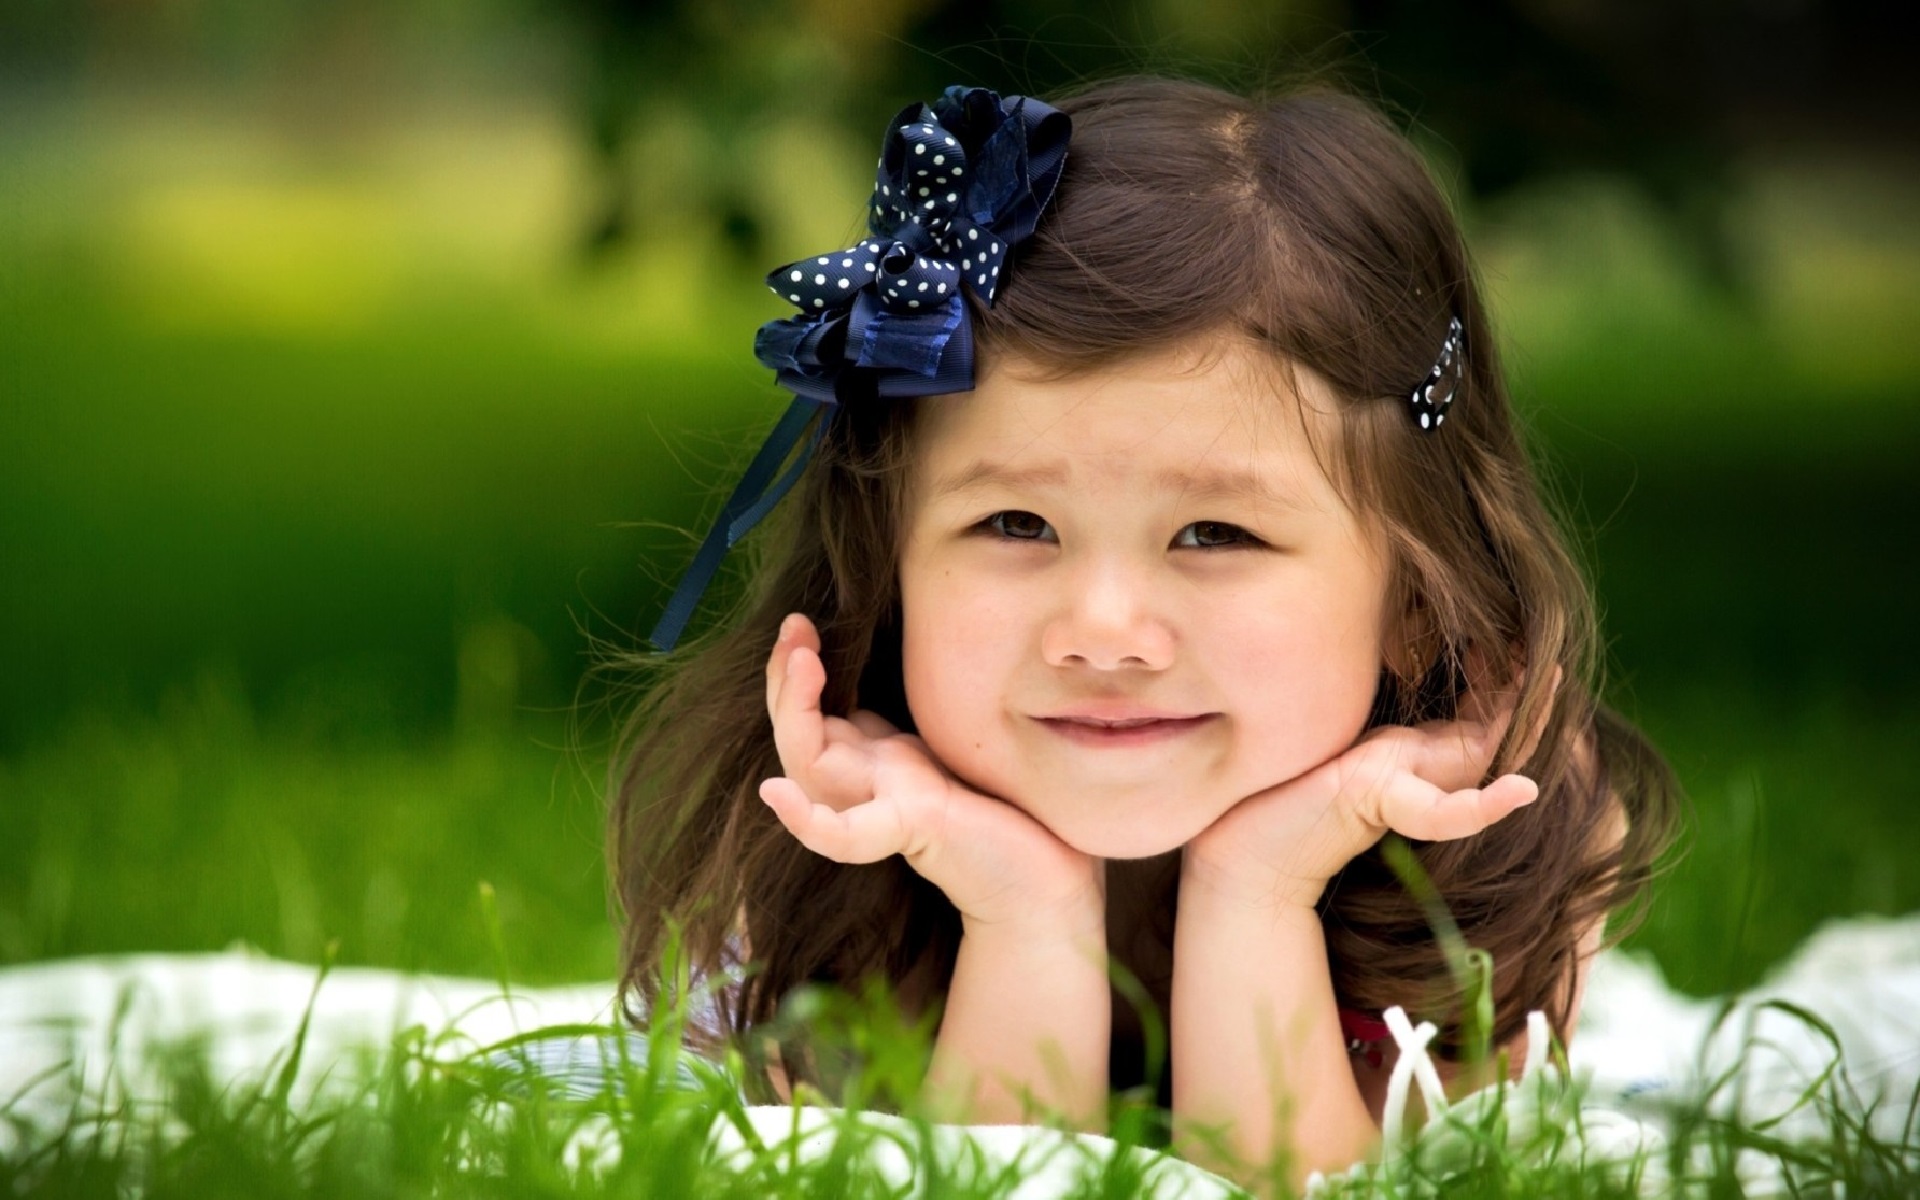 Cute Baby Pics & HD Images | Cute Baby HD Wallpapers